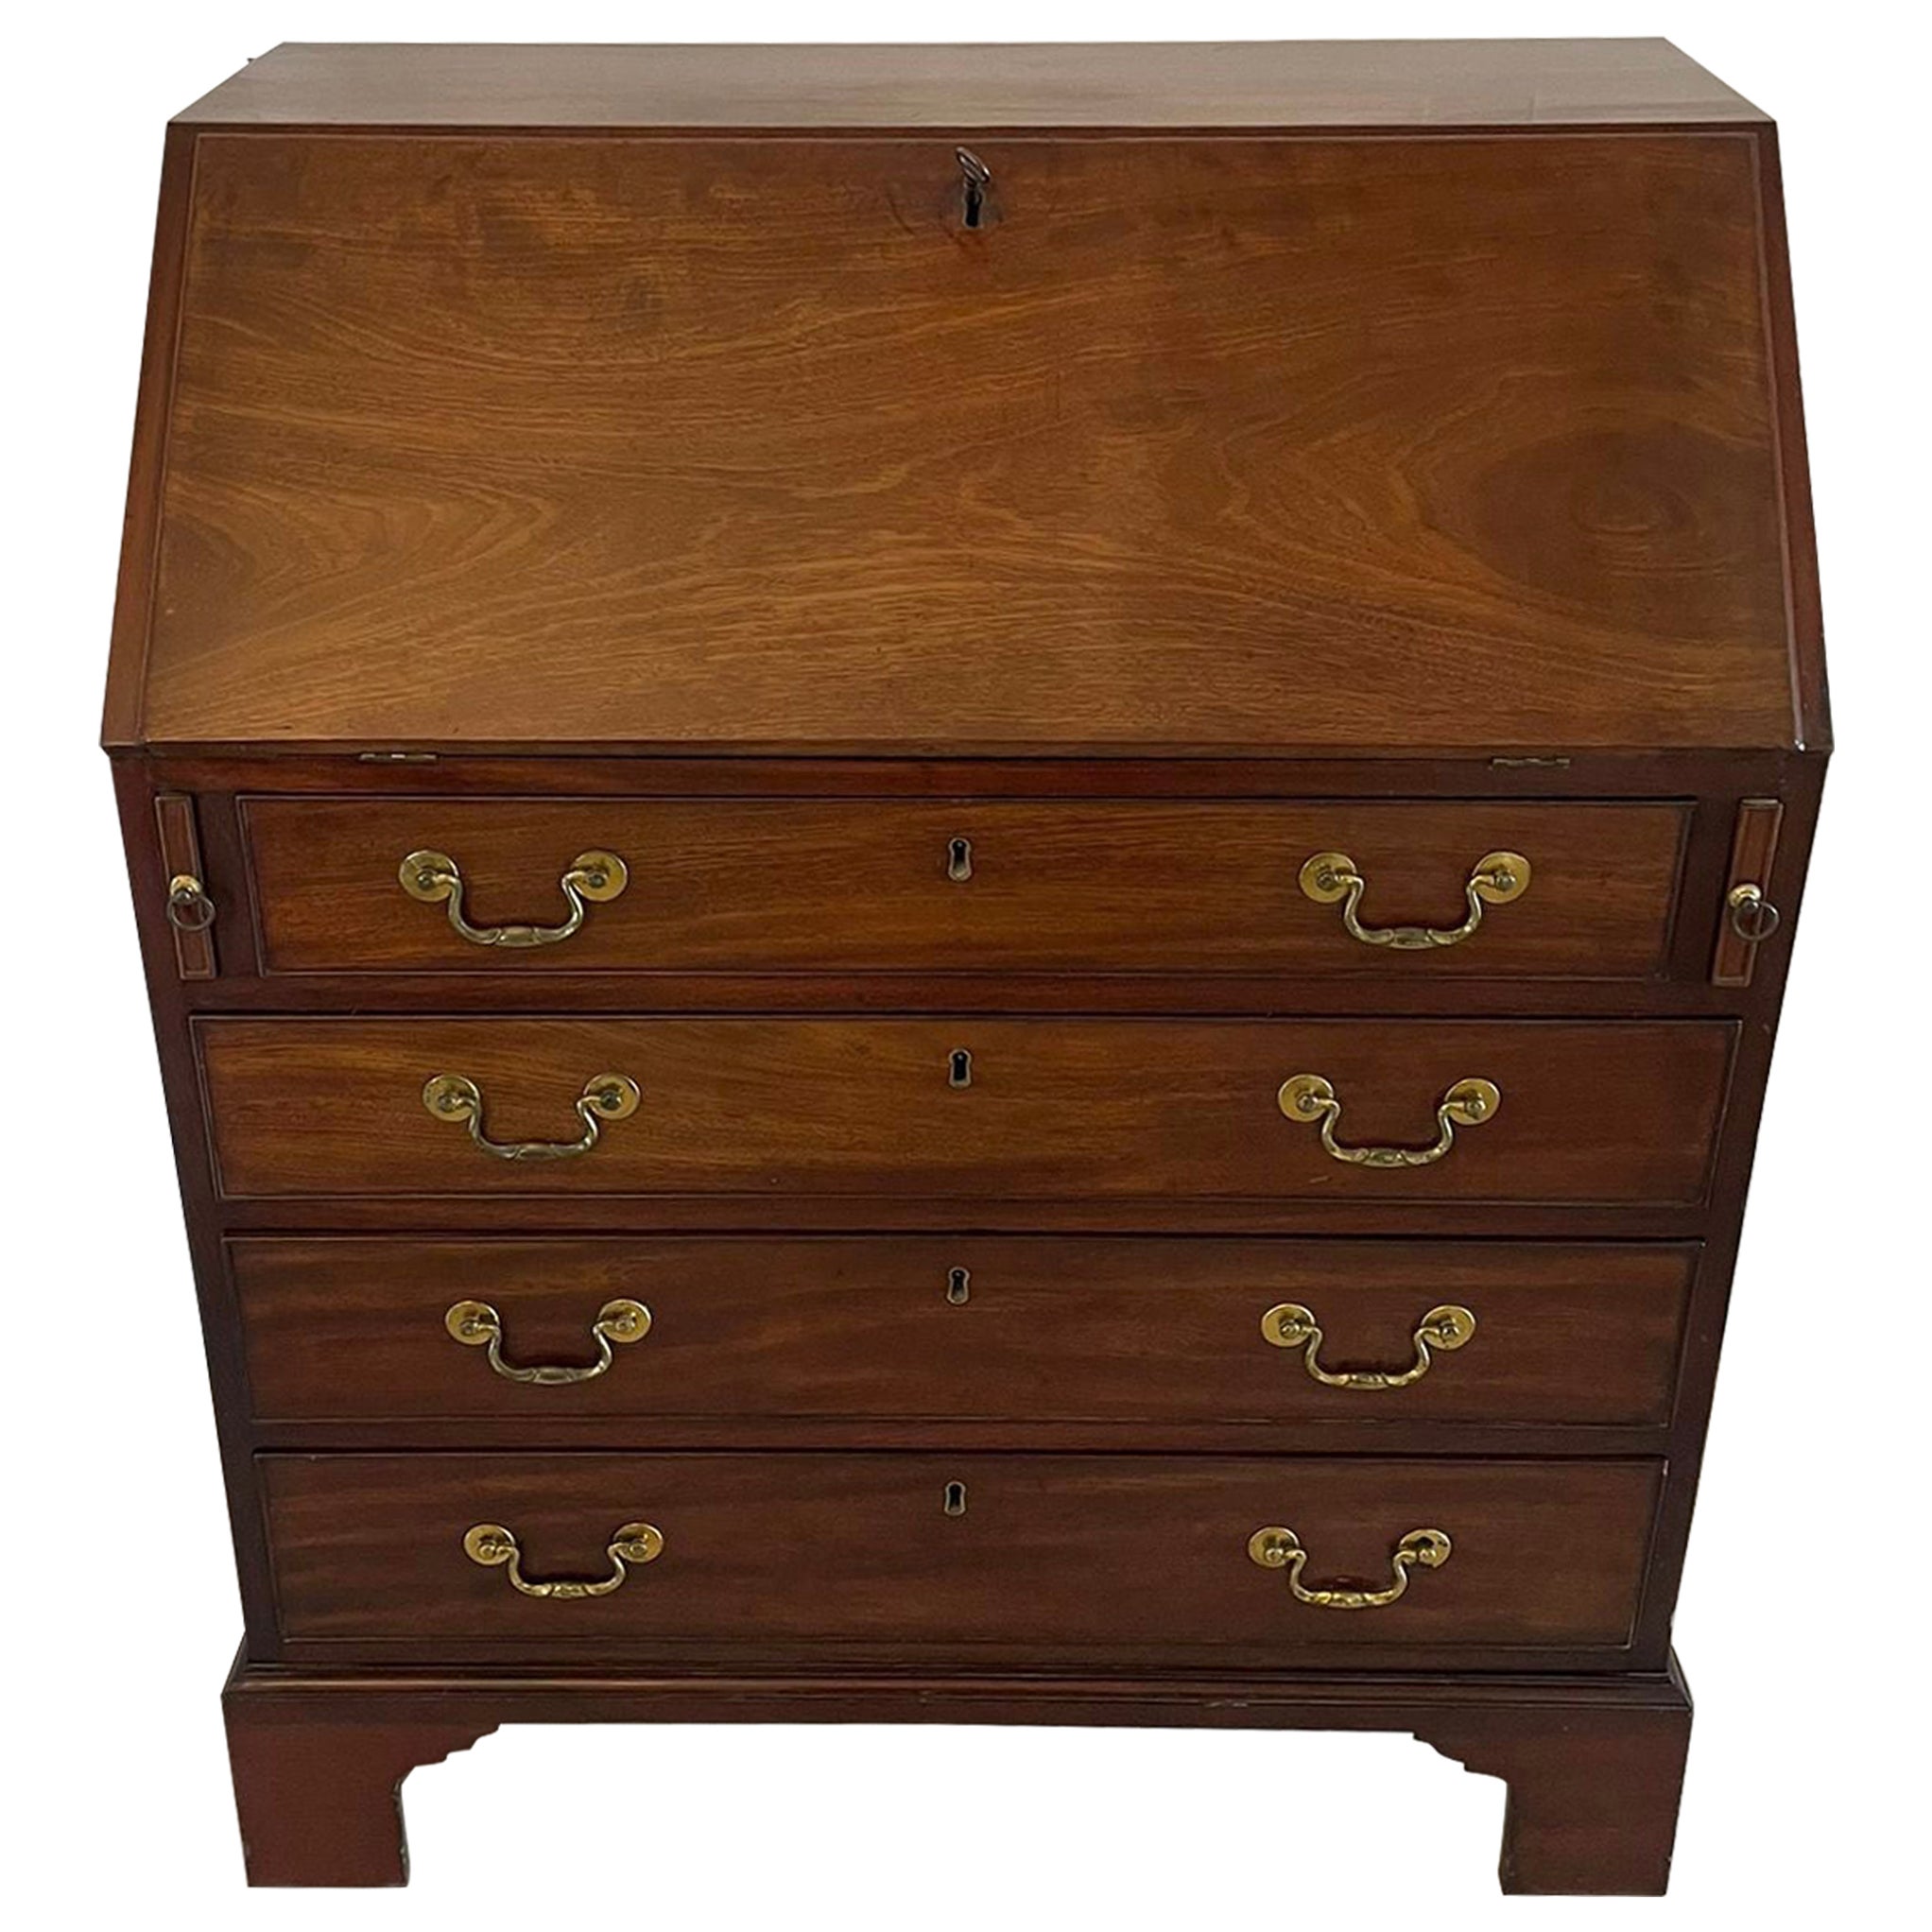 Outstanding 18th Century Quality George III Antique Mahogany Bureau For Sale